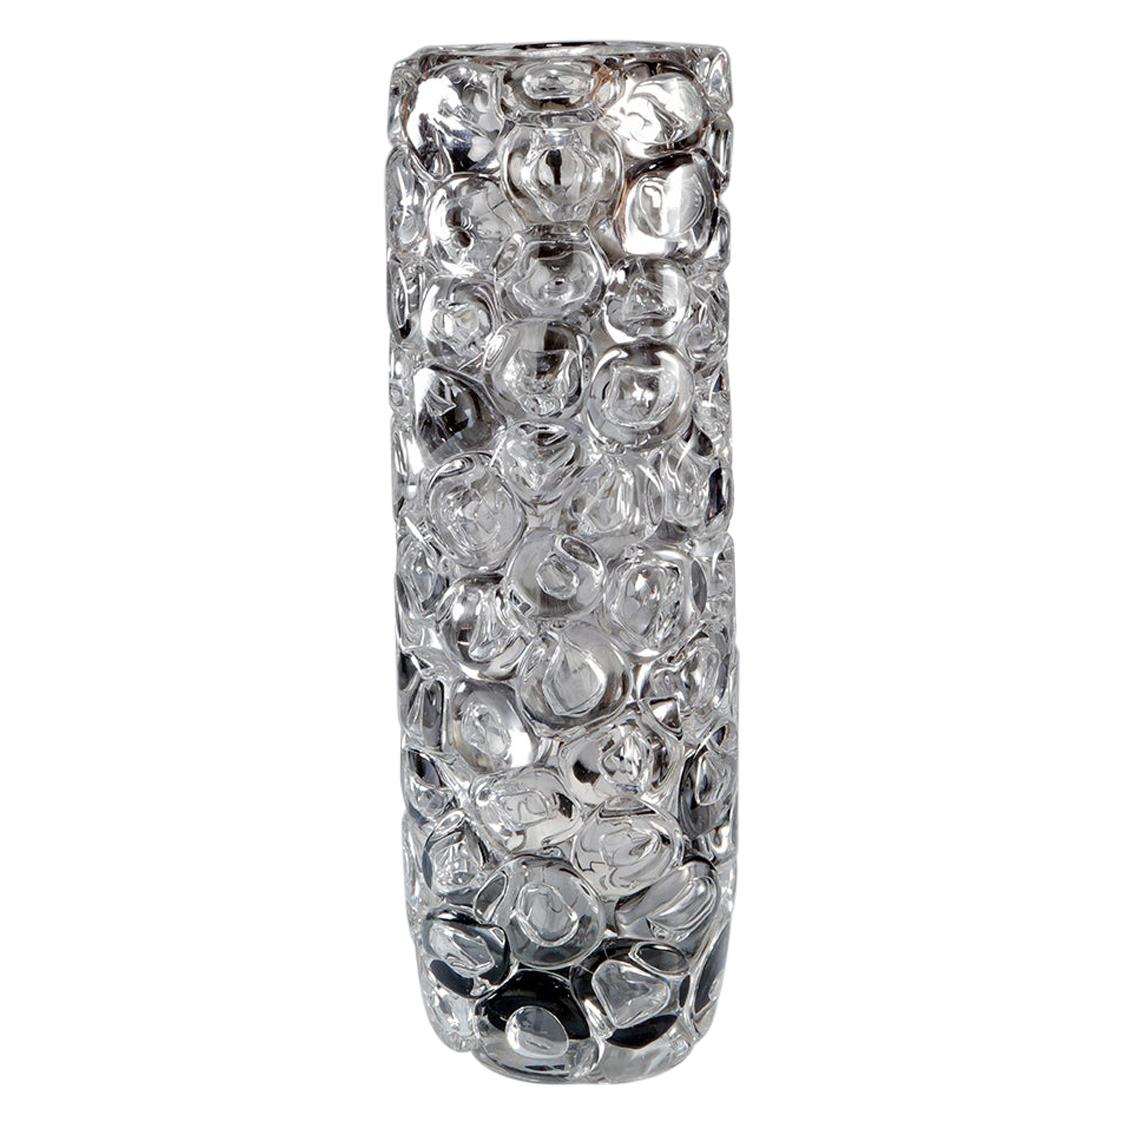 Bubblewrap in Monochrome II, a Silver and Clear Glass Vase by Allister Malcolm